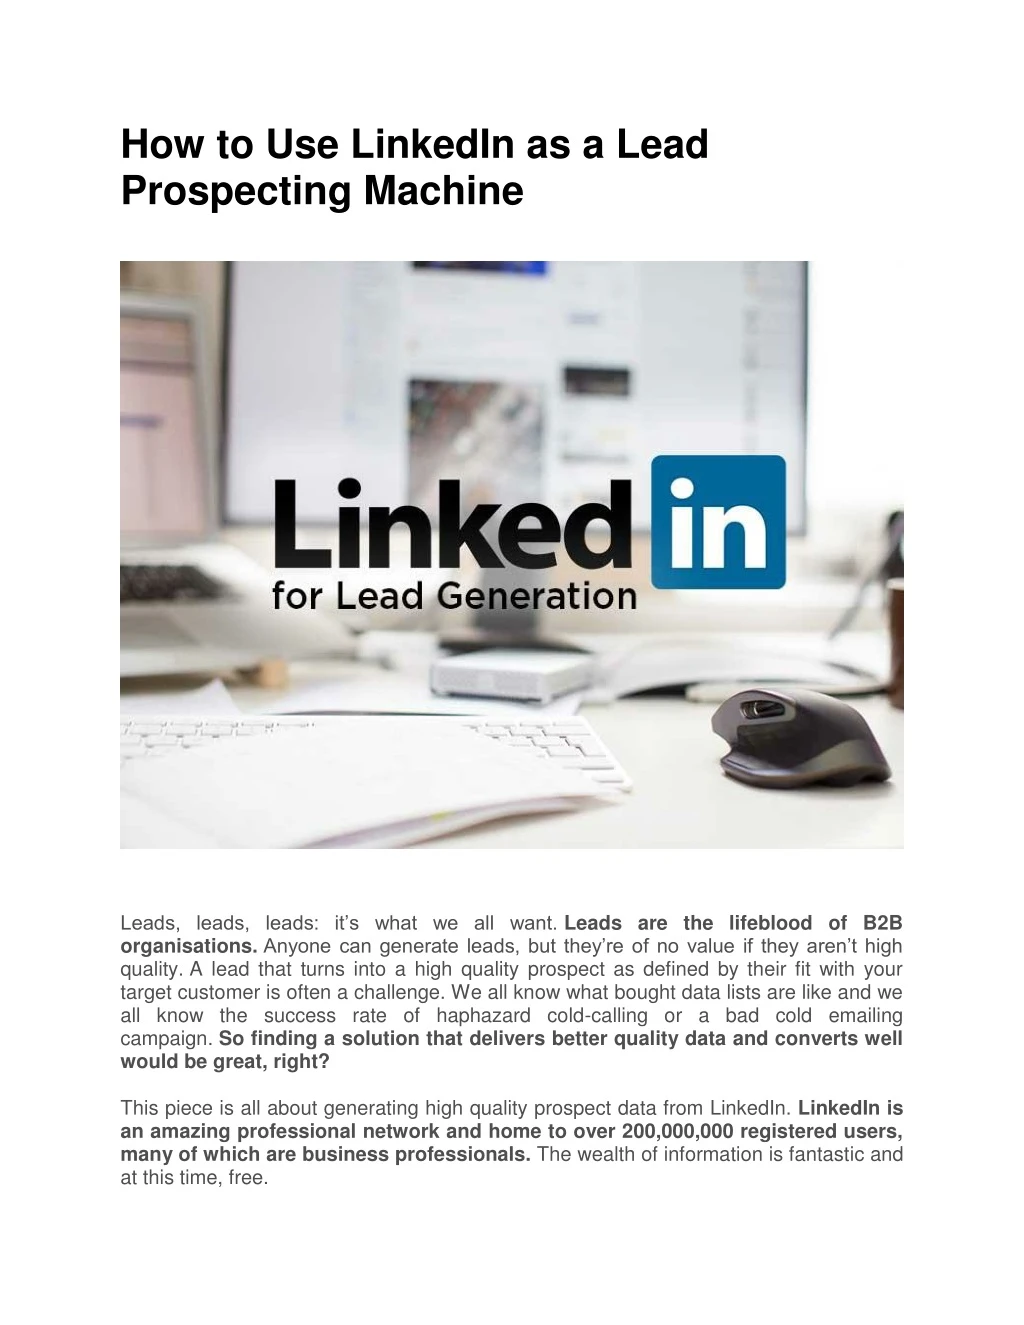 how to use linkedin as a lead prospecting machine